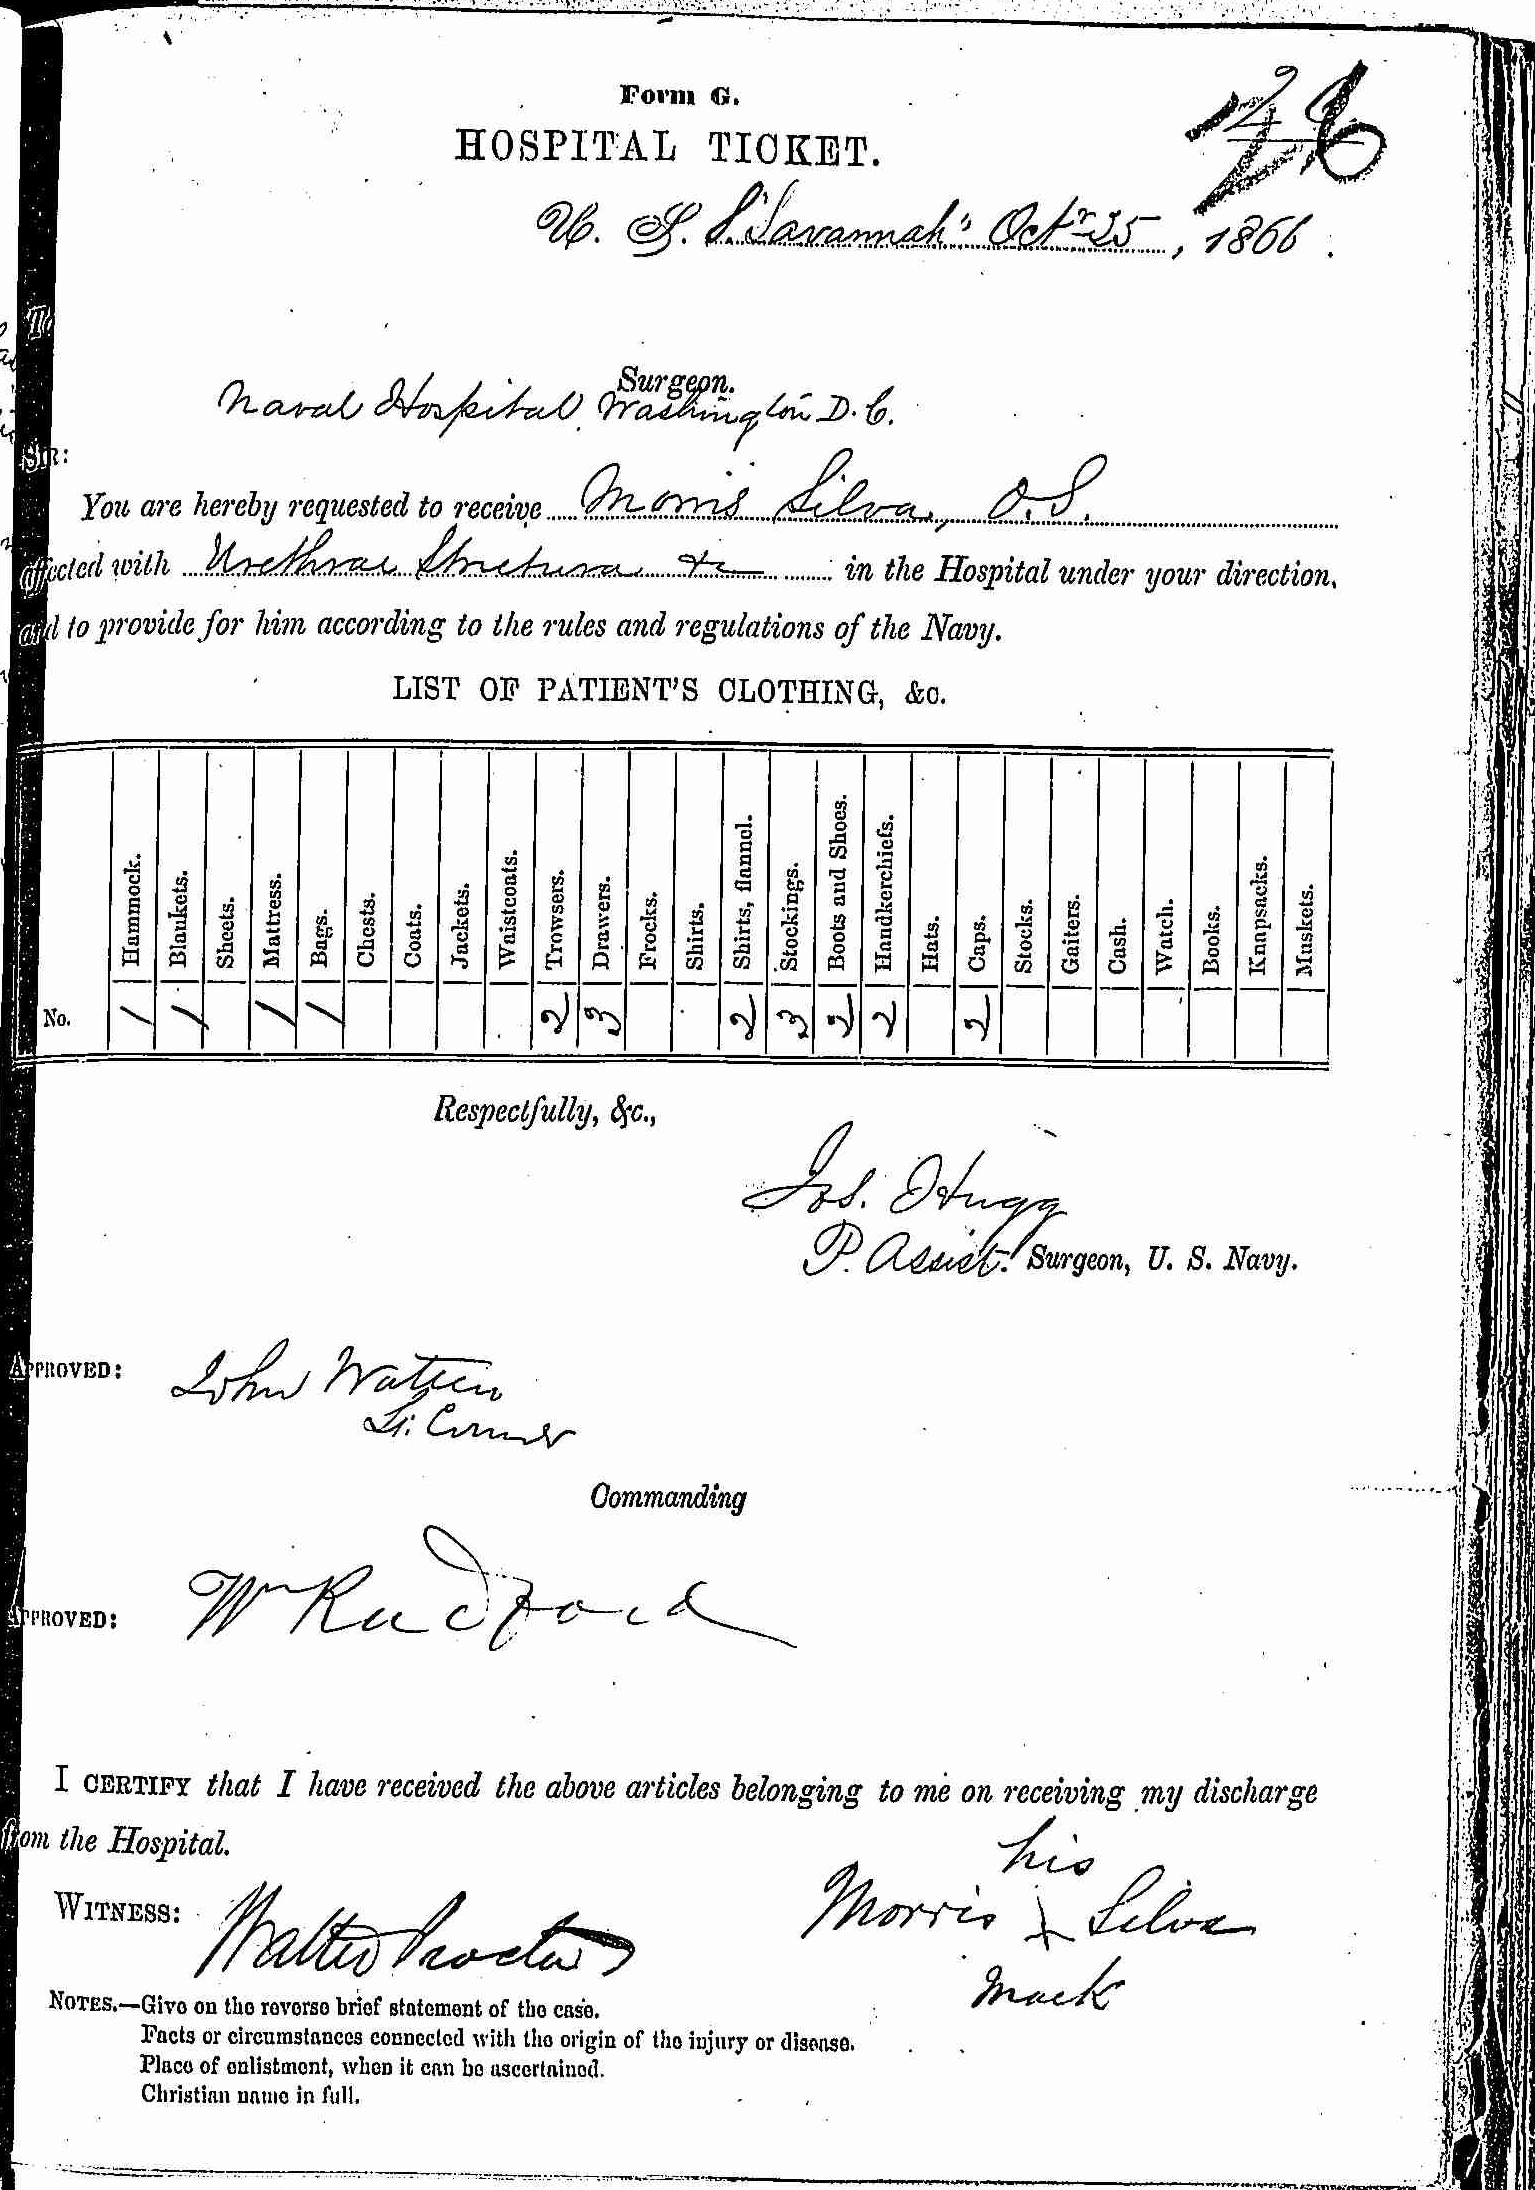 Entry for Morris Silva (page 1 of 2) in the log Hospital Tickets and Case Papers - Naval Hospital - Washington, D.C. - 1865-68